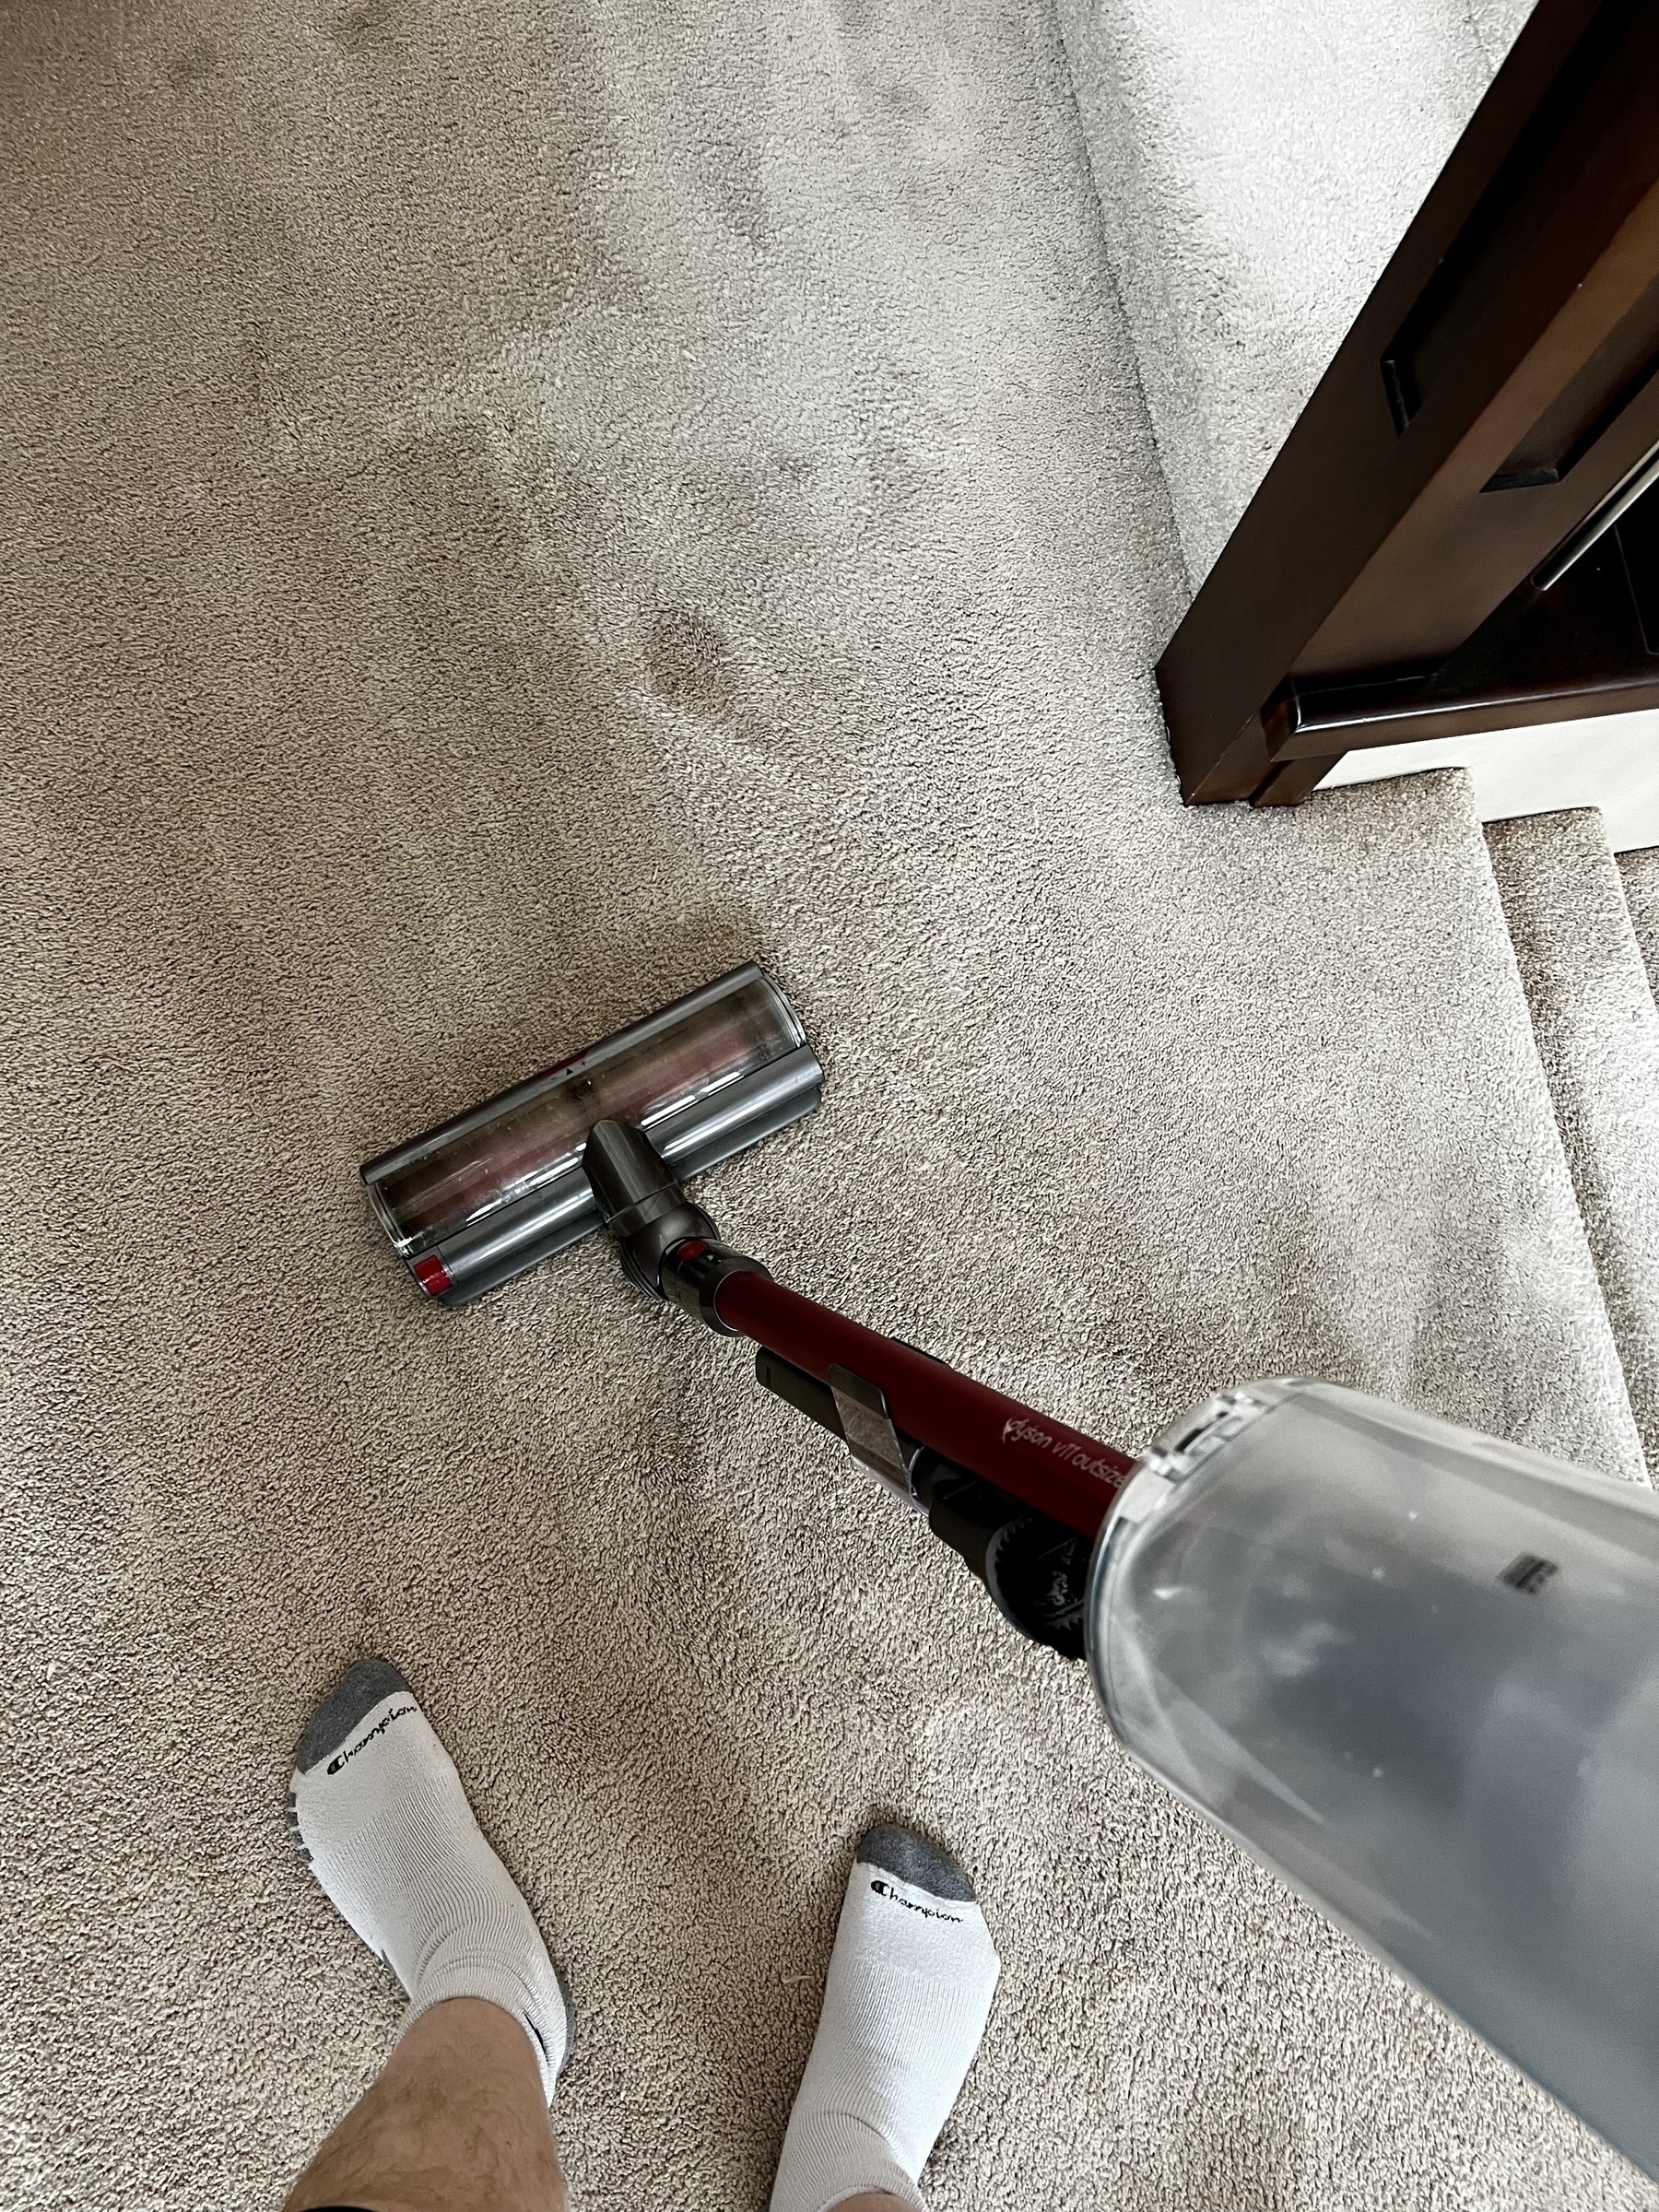 Looking down at a vacuum and some socked feet 